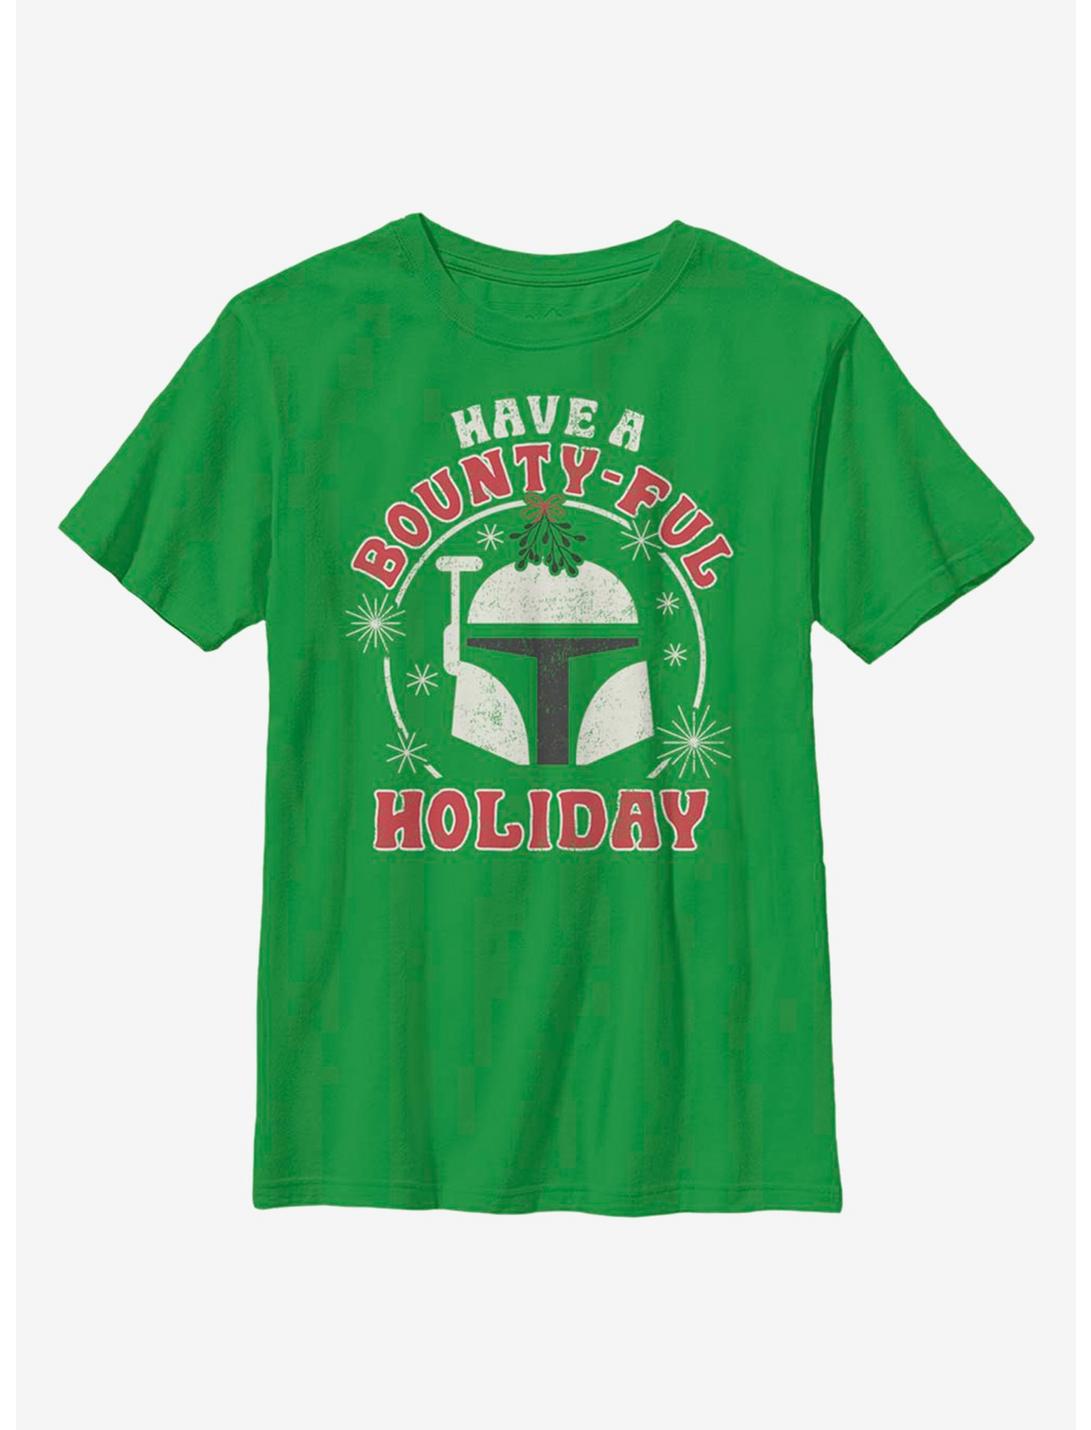 Star Wars Have A Bounty-Ful Holiday Cute Youth T-Shirt, KELLY, hi-res